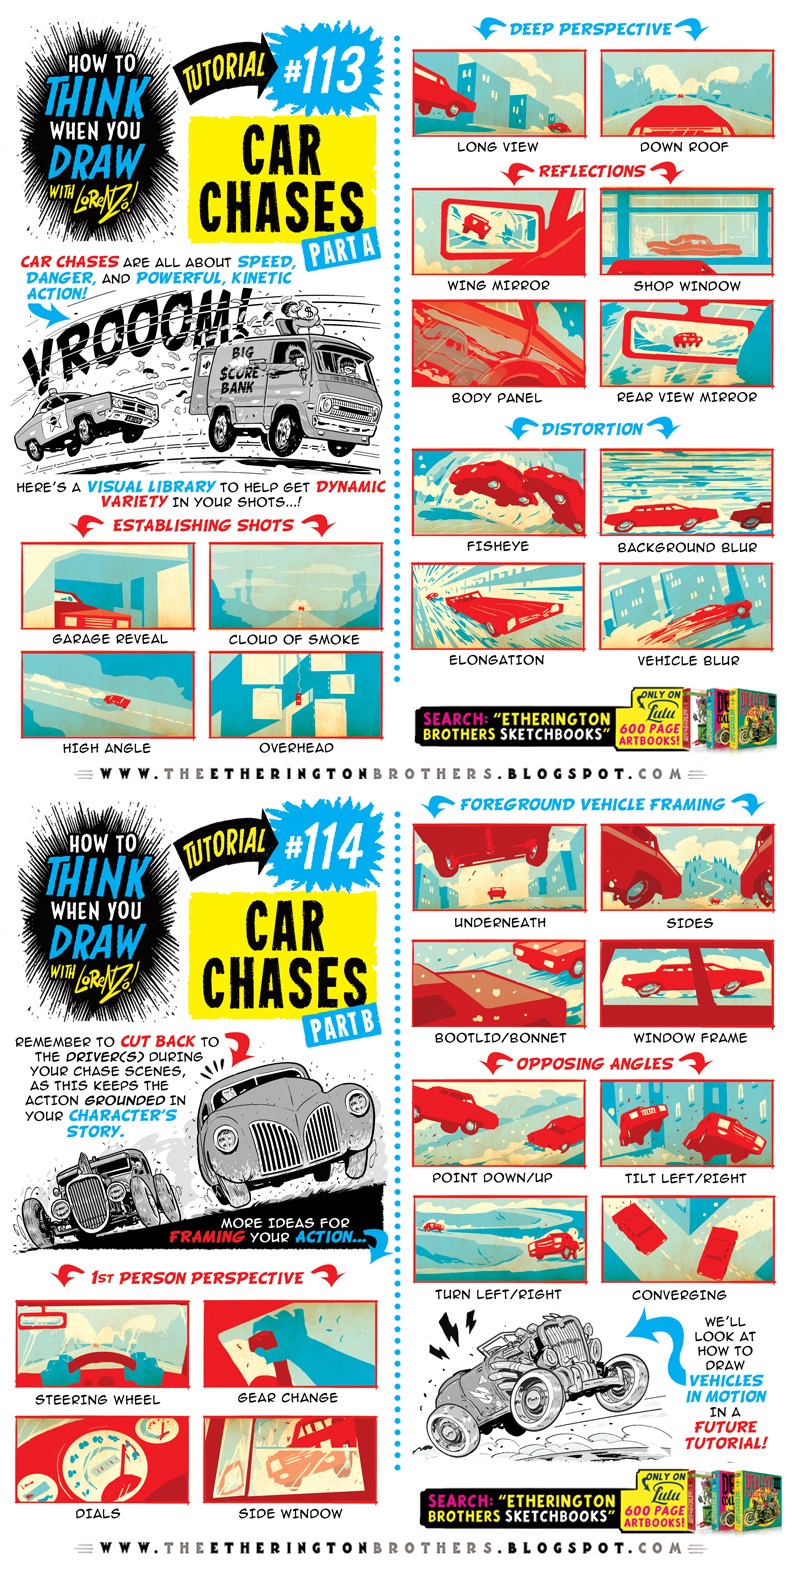 How to THINK when you DRAW Car Chases